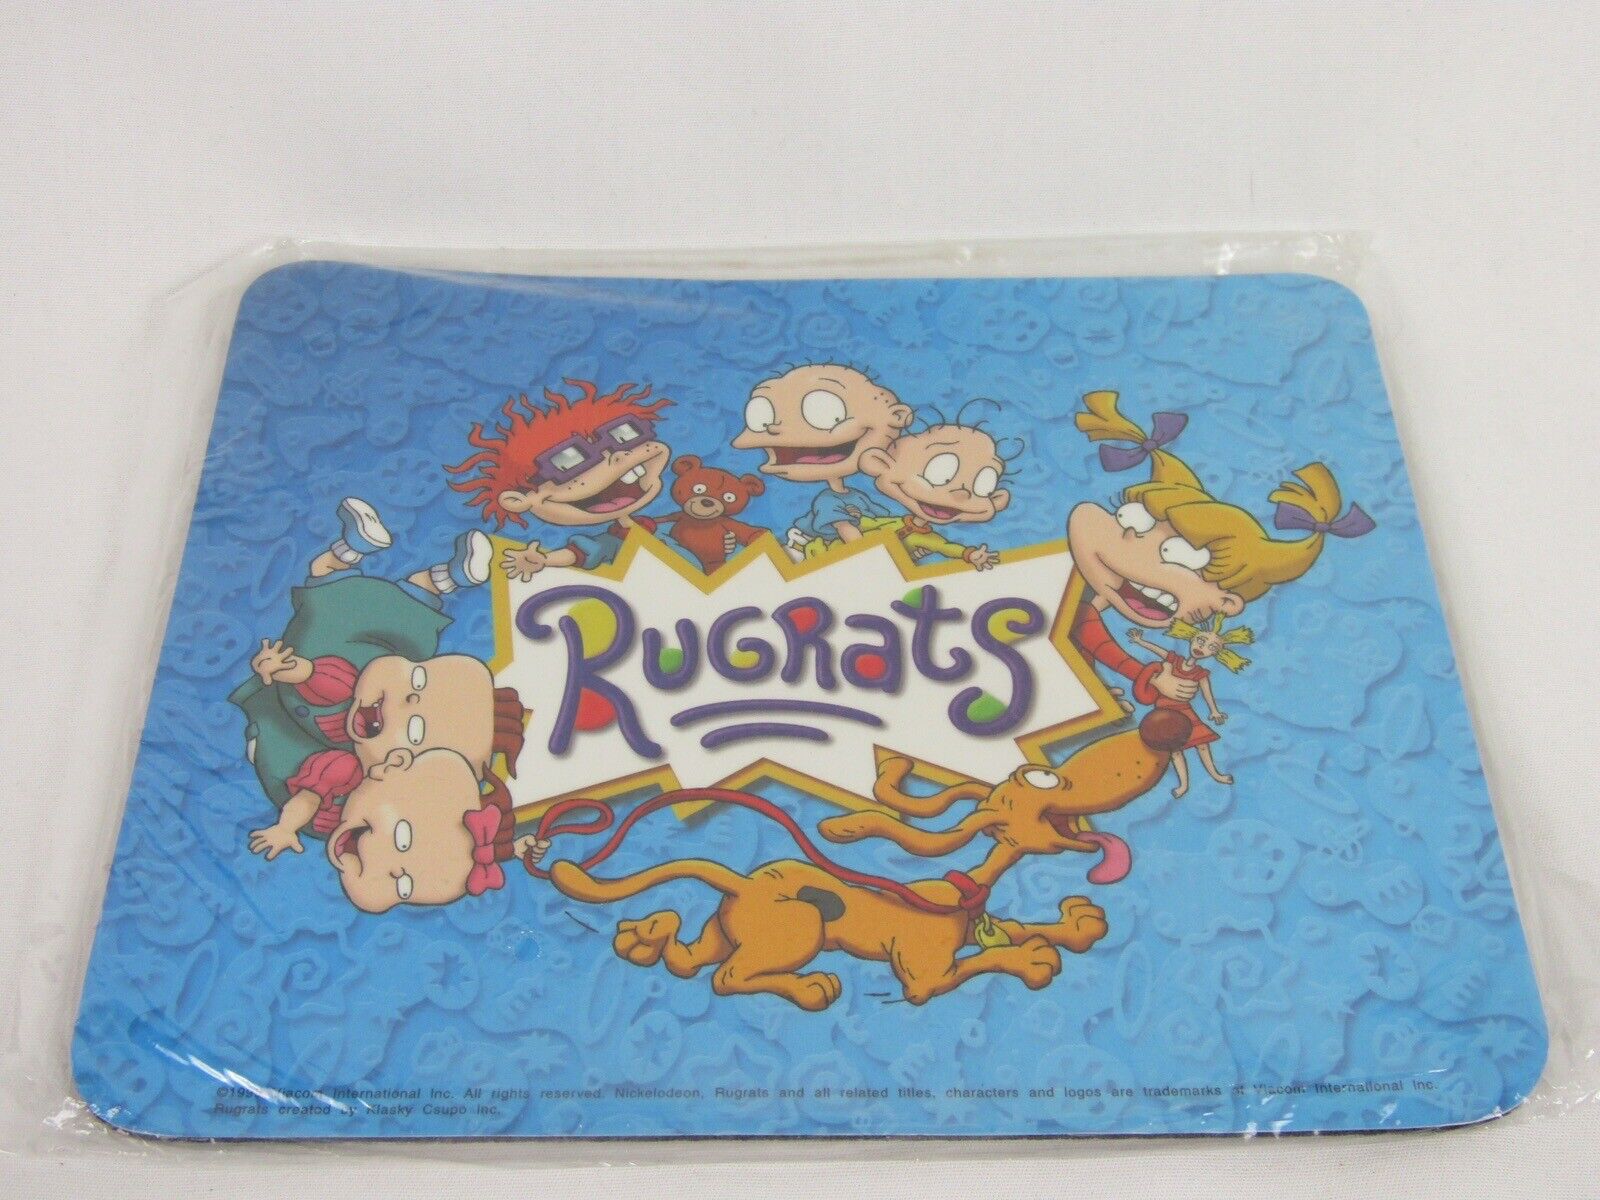 Vintage Rugrats Mousepad 1999-Viacom-Nickelodeon-Tommy/Angelica Pickles-Chuckie